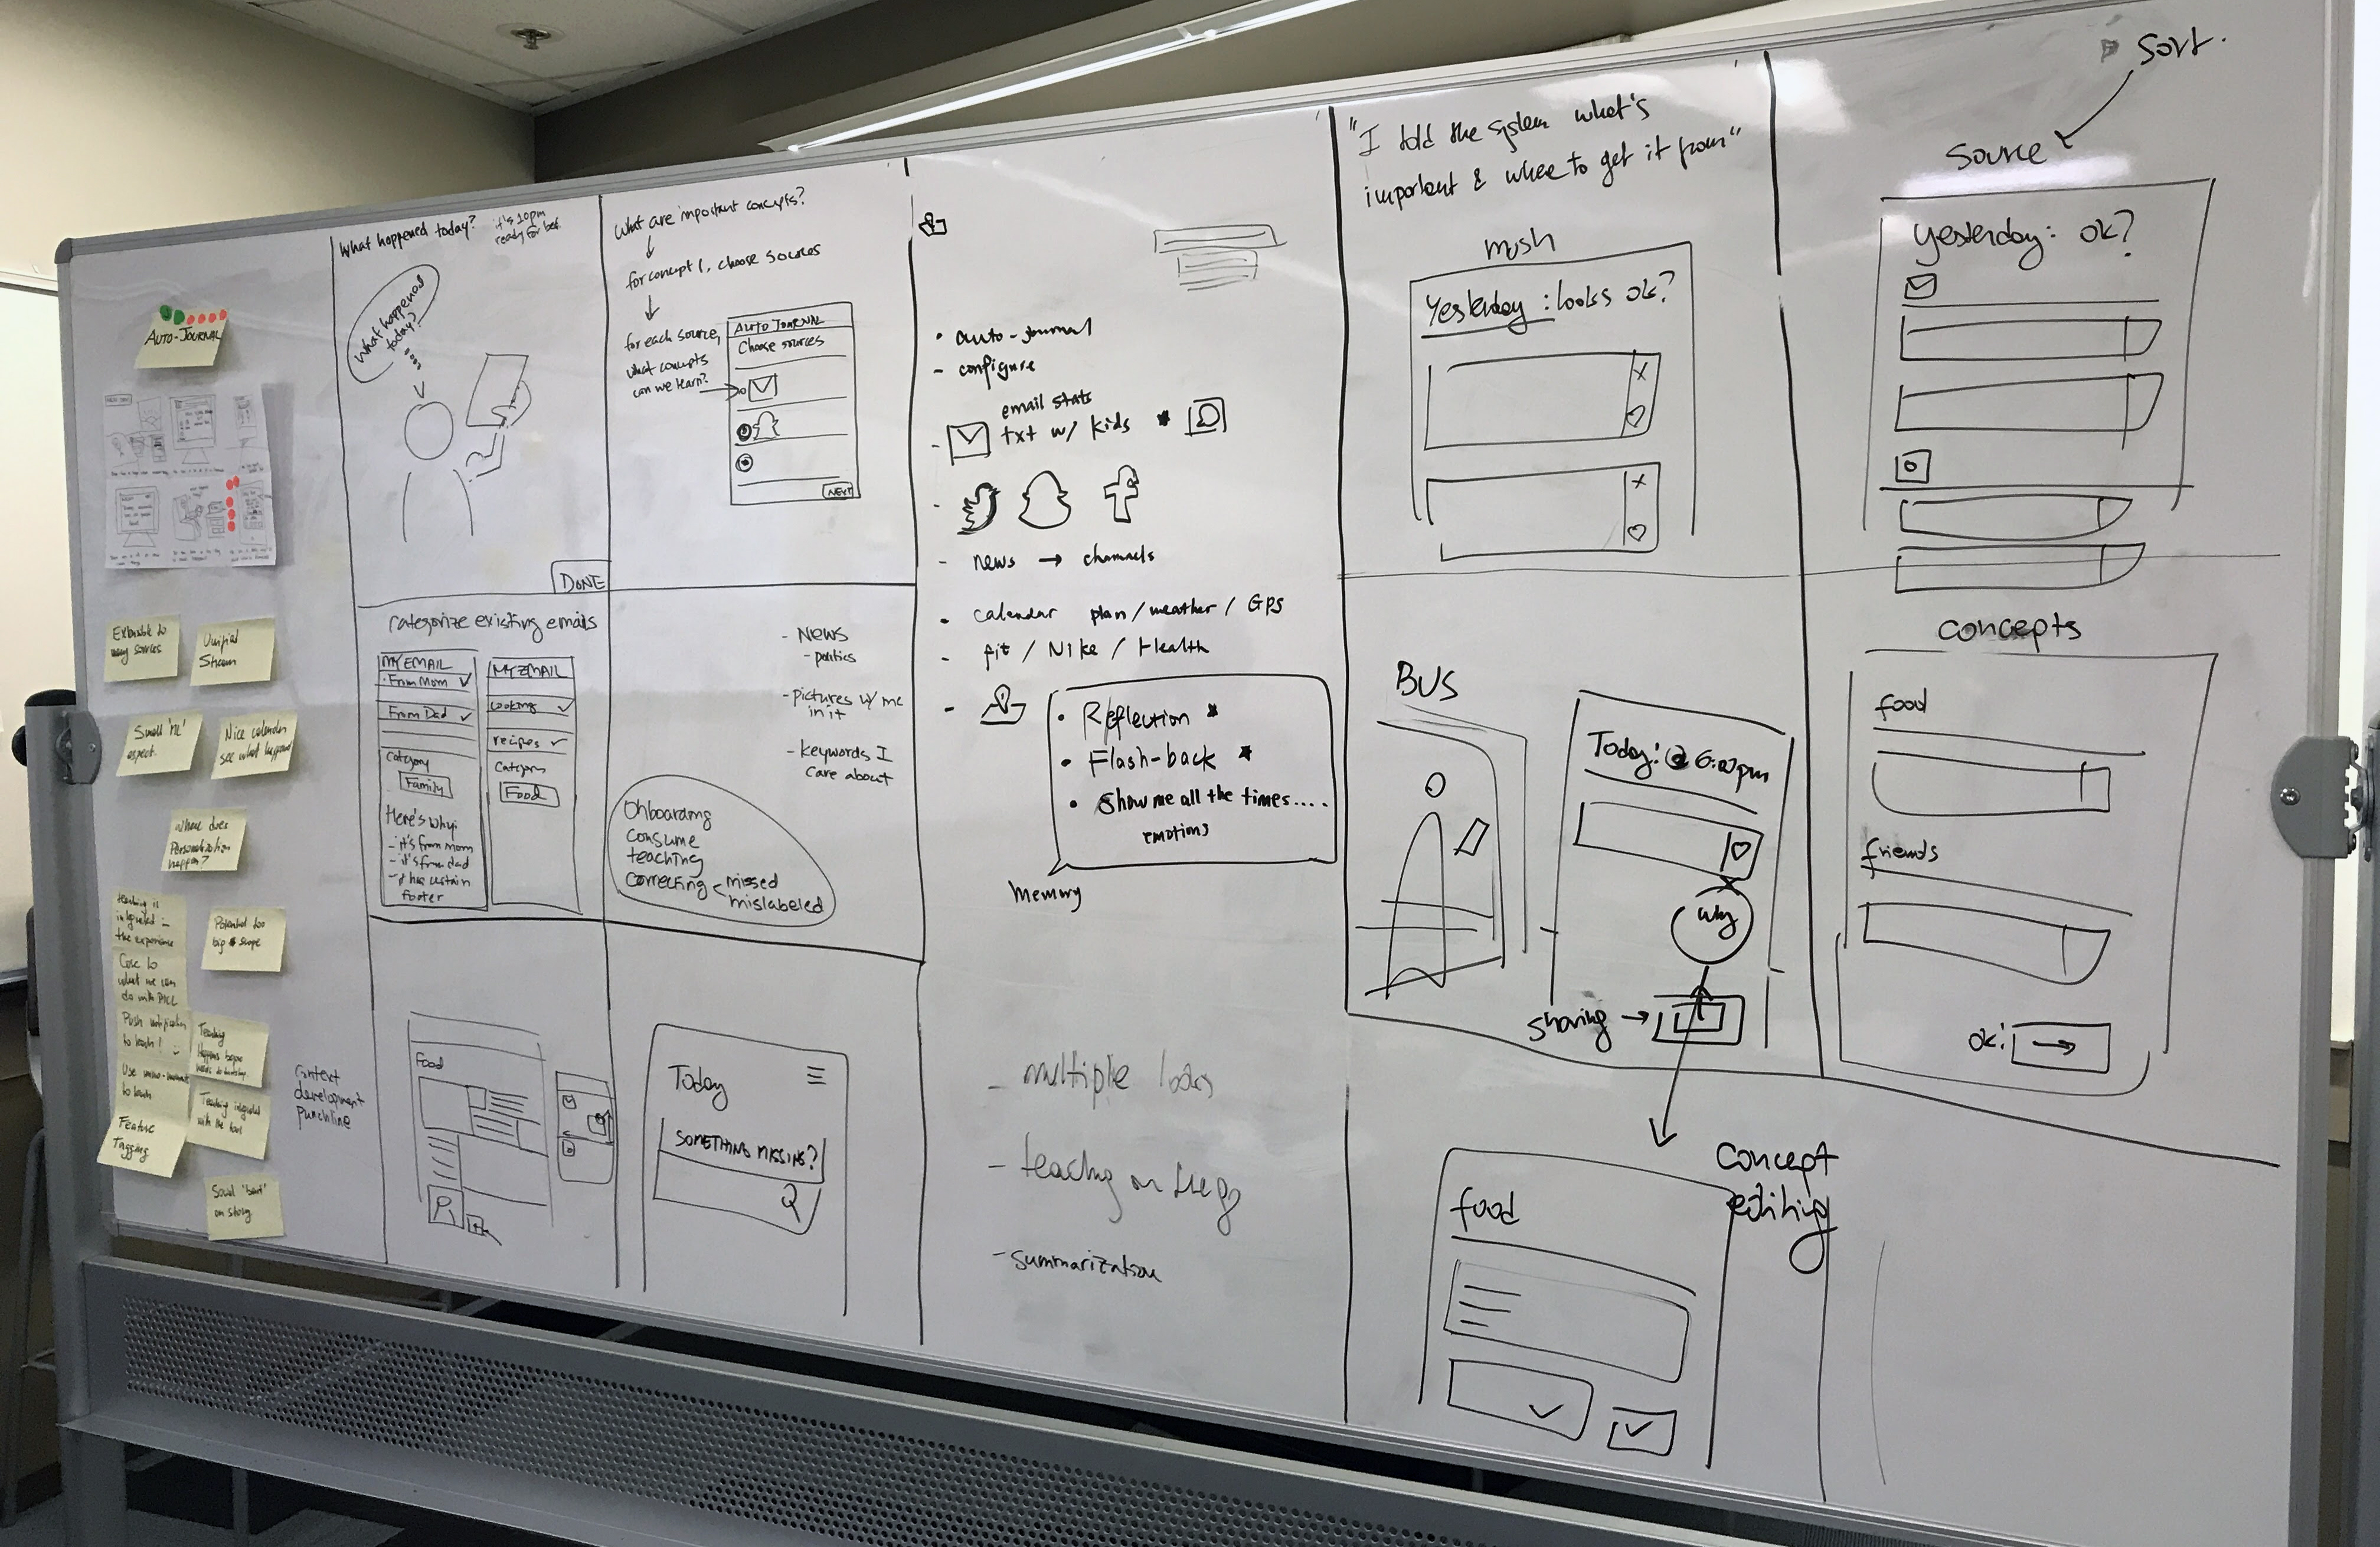 Wireframing of a mobile app, on a whiteboard